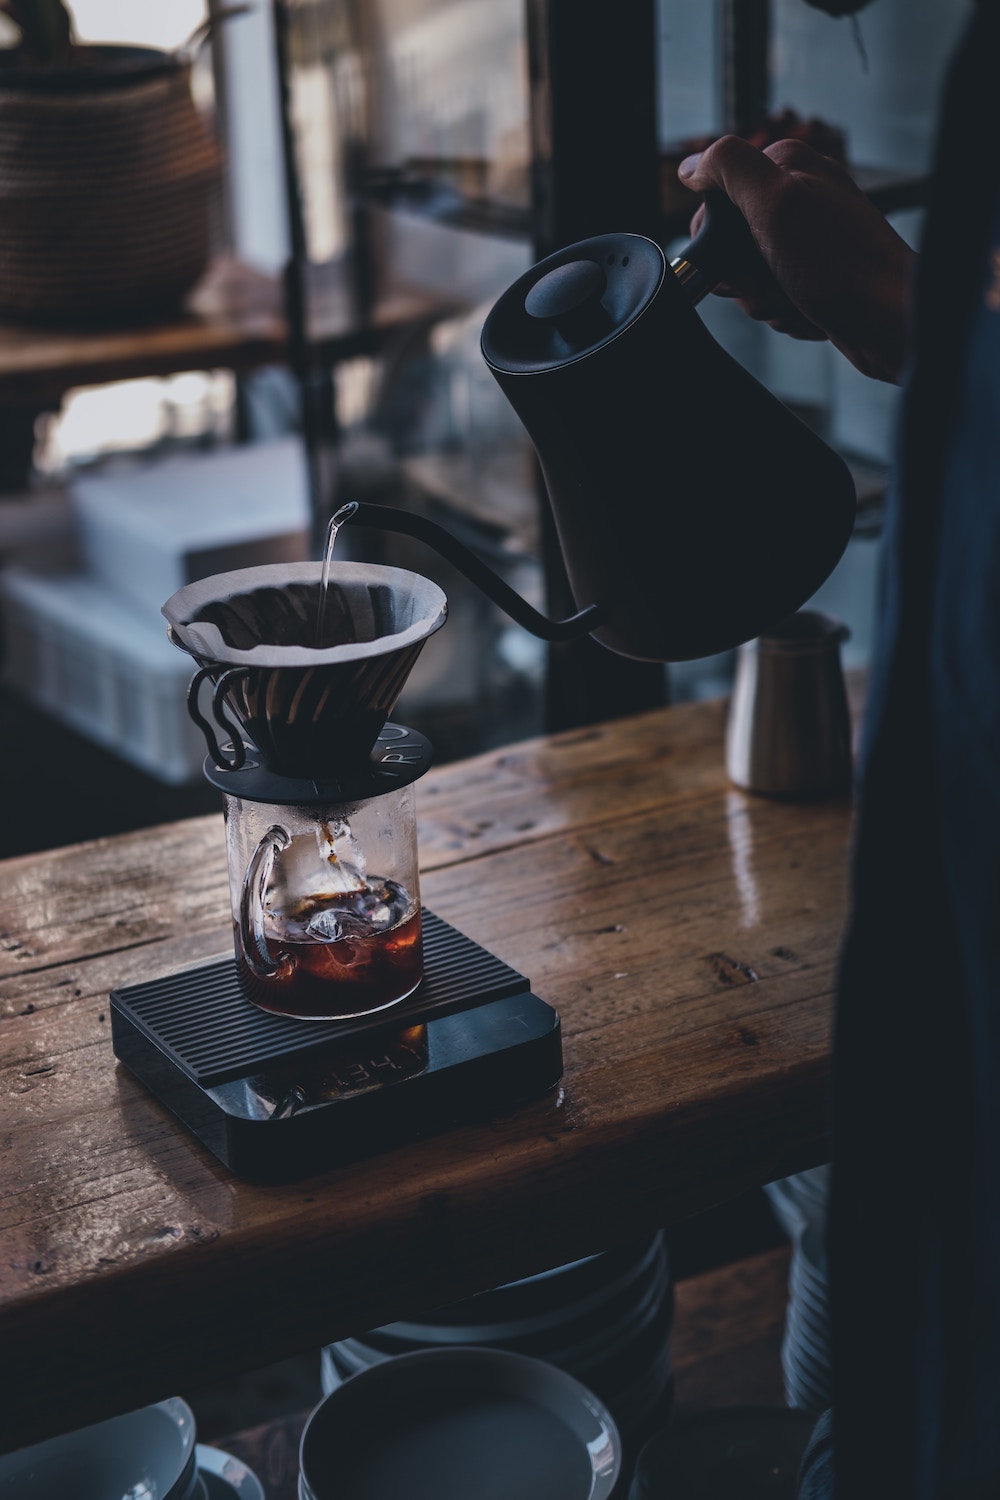 Pour Over Coffee: What’s the Deal and is it Worth It?